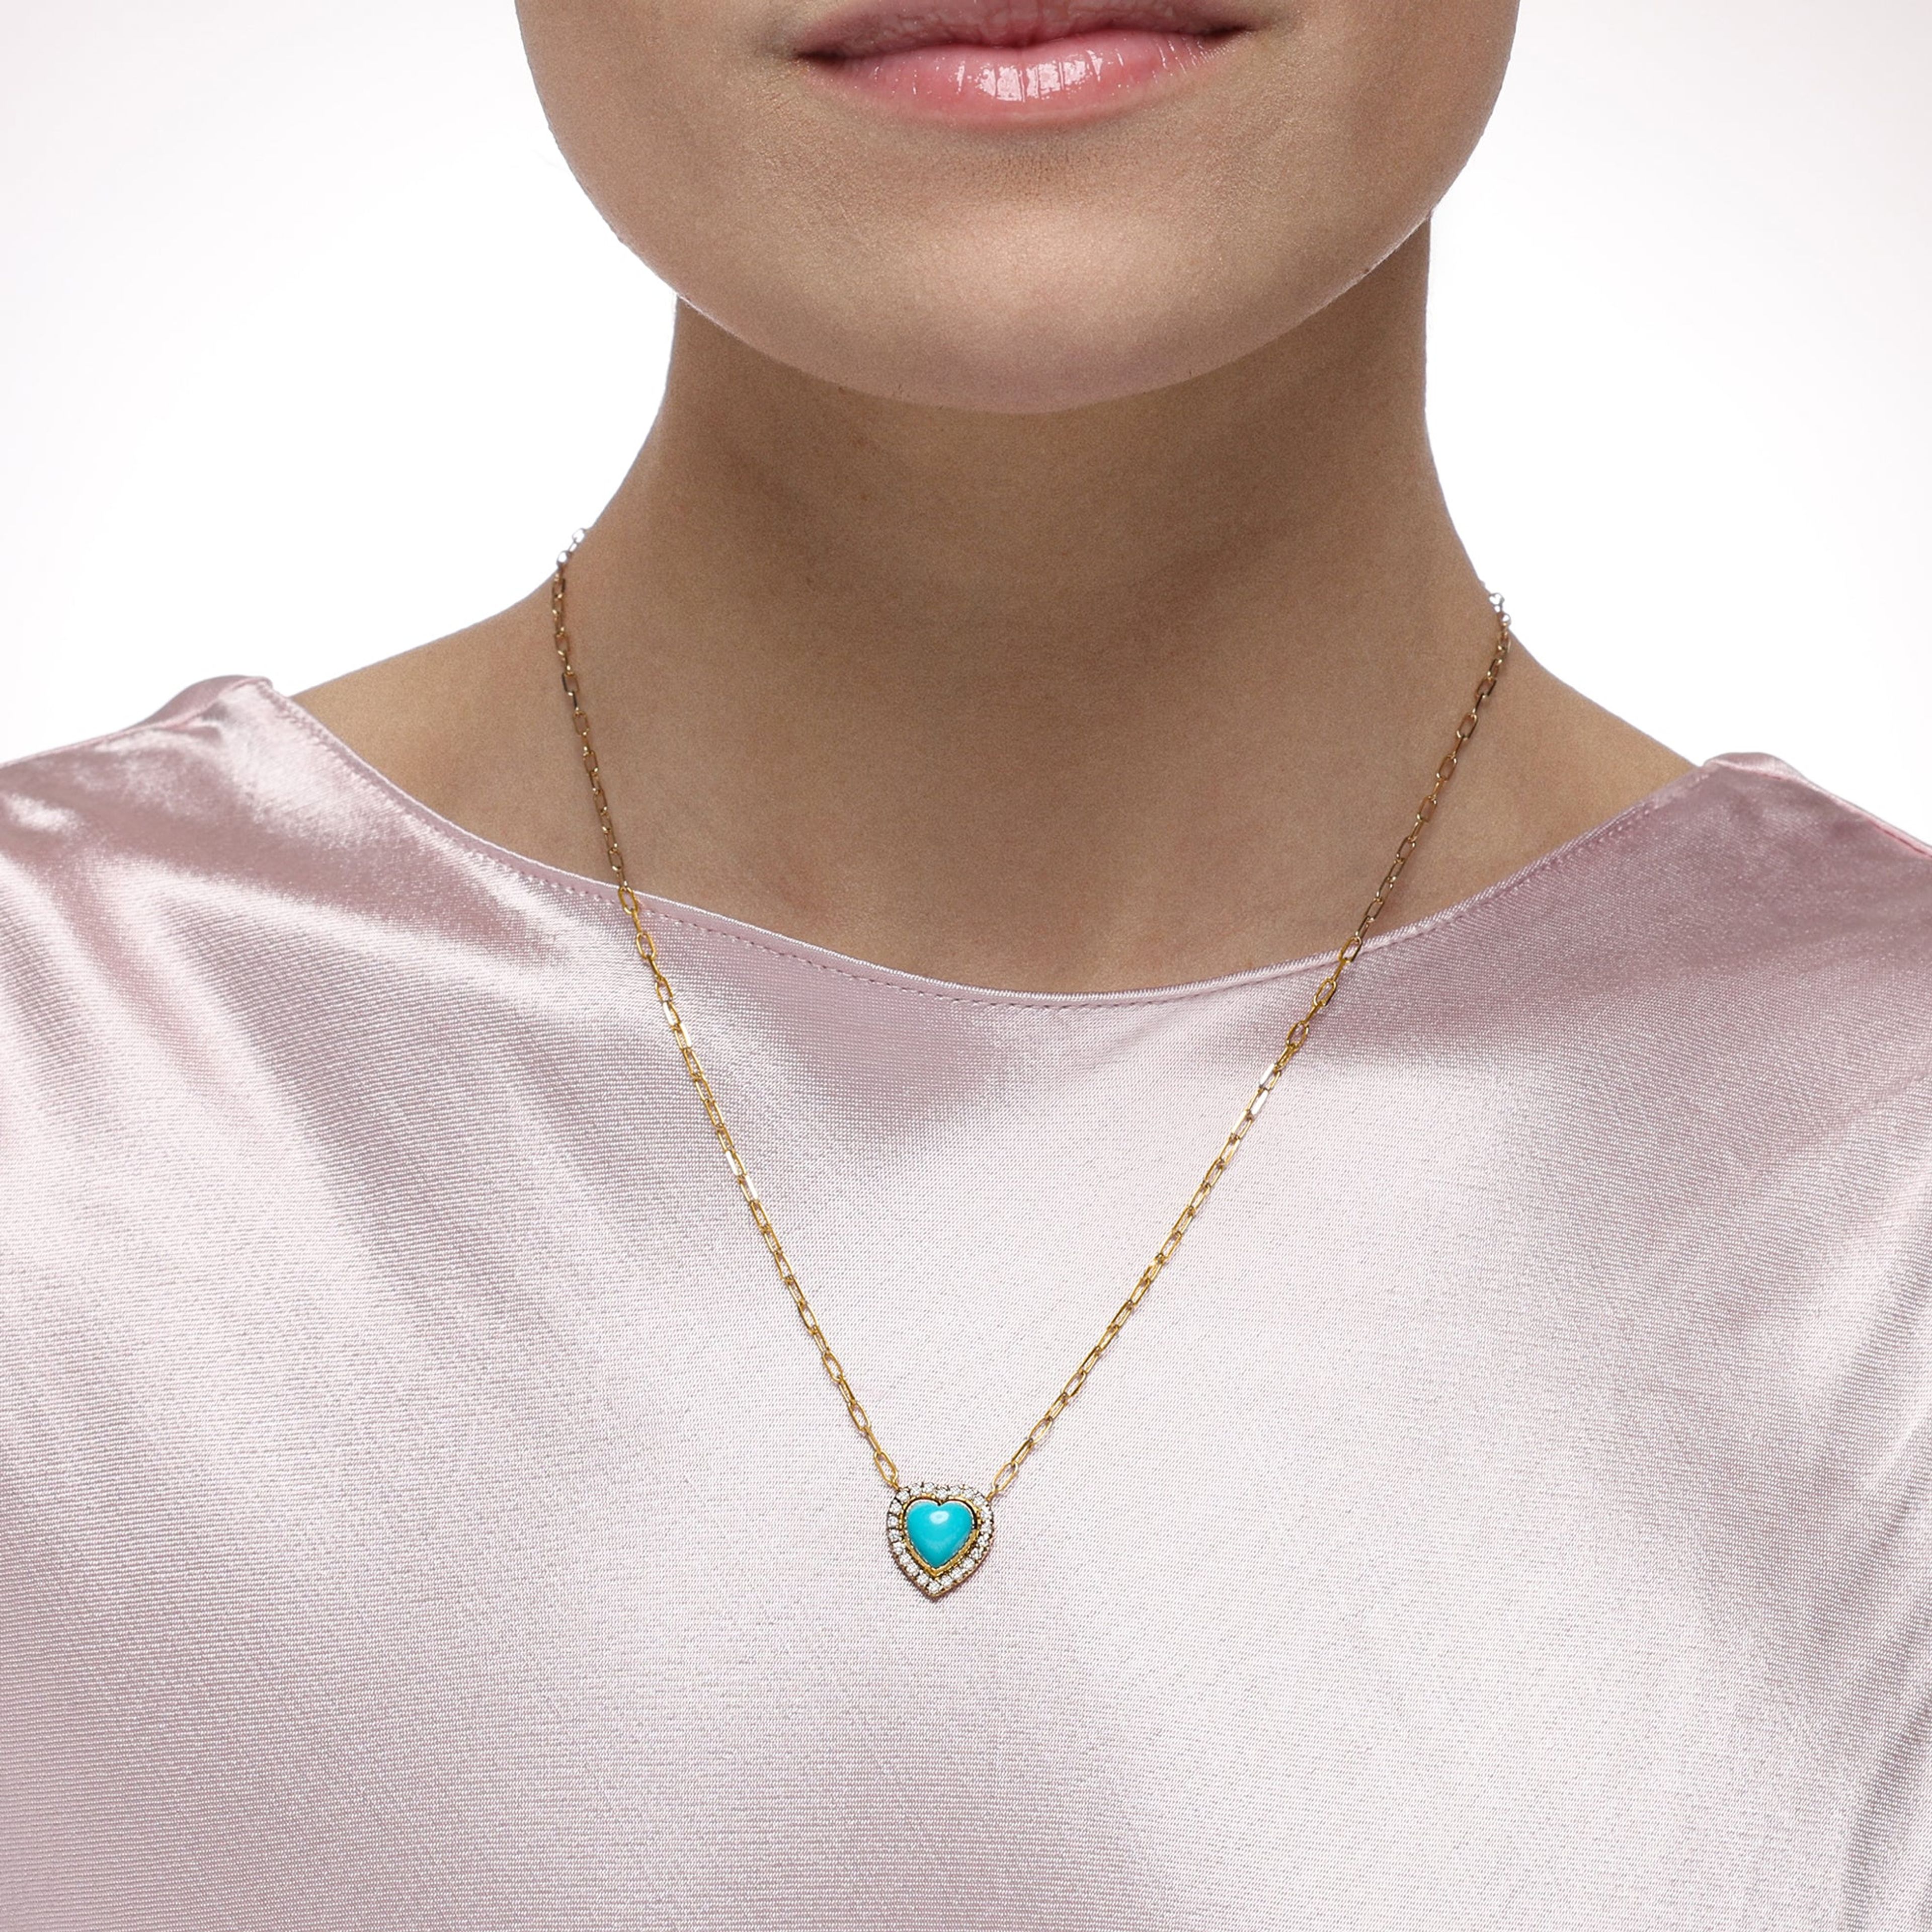 Puffed Heart Turquoise Necklace